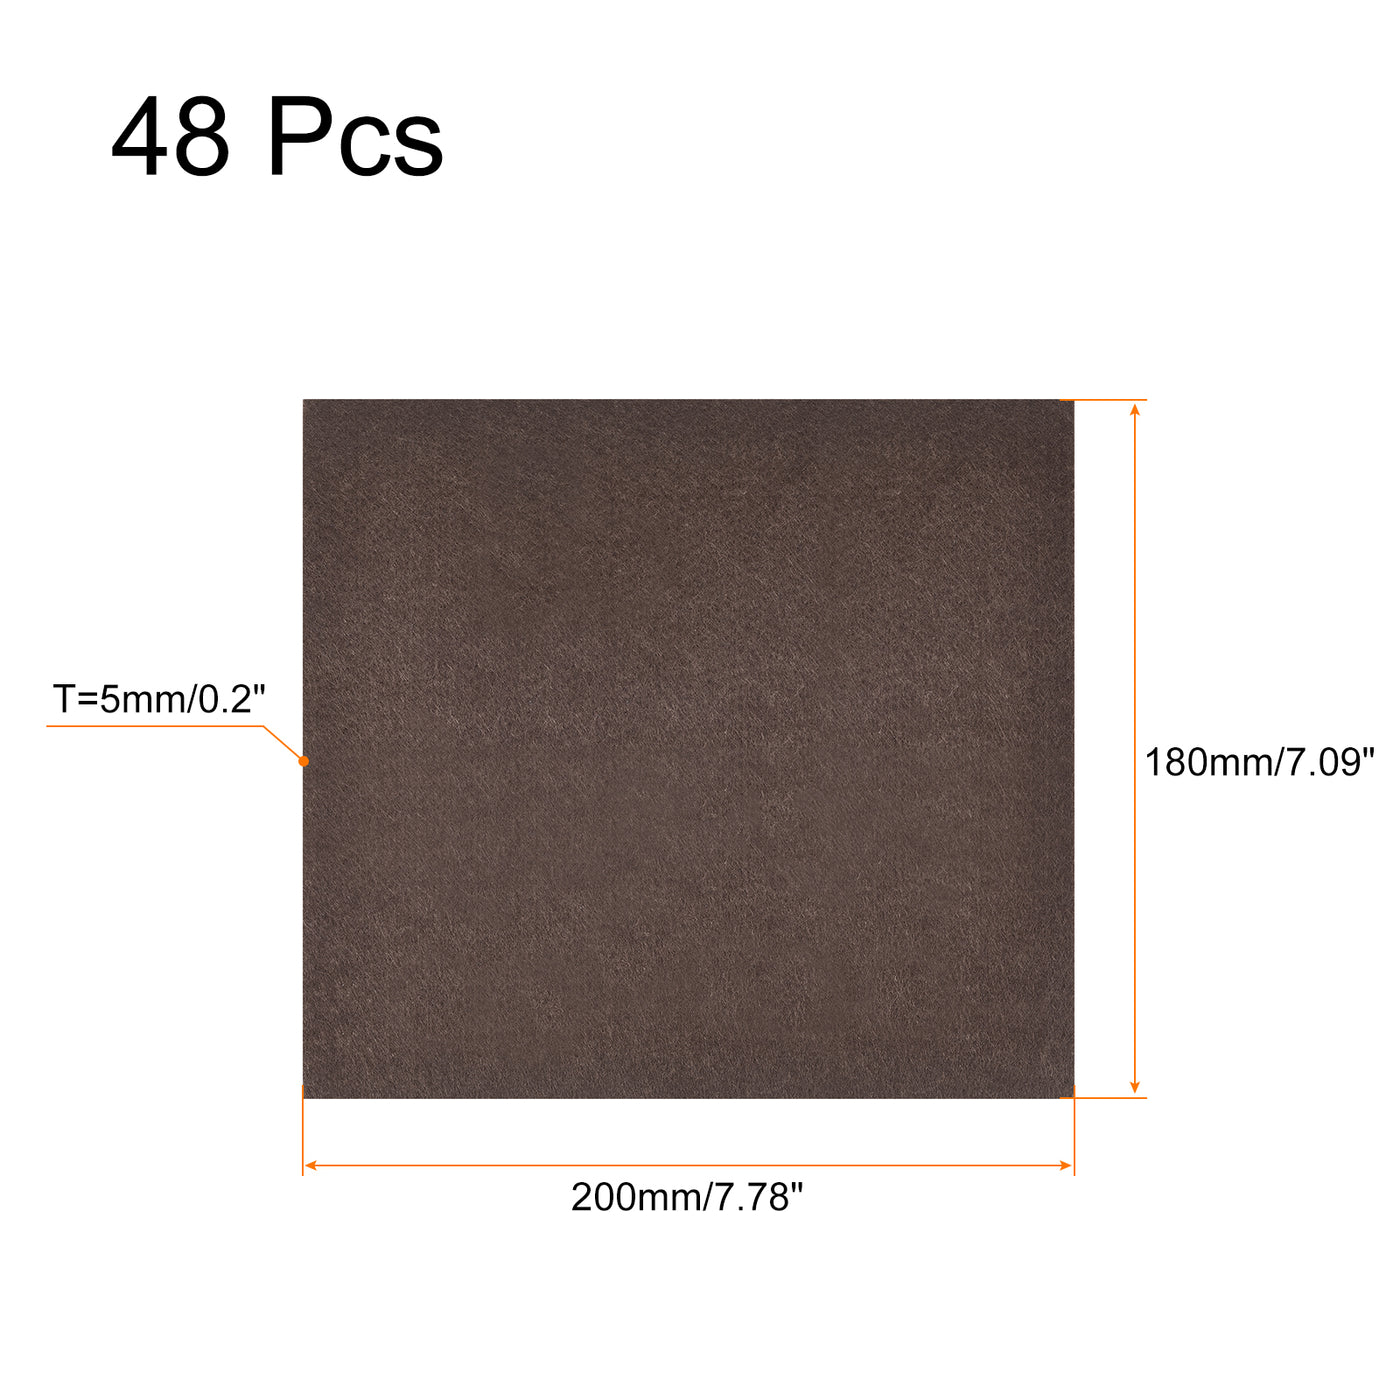 uxcell Uxcell Felt Furniture Pads, 200mm x 180mm Self Adhesive Square Floor Protectors for Furniture Legs Hardwood Floor, Brown 48Pcs